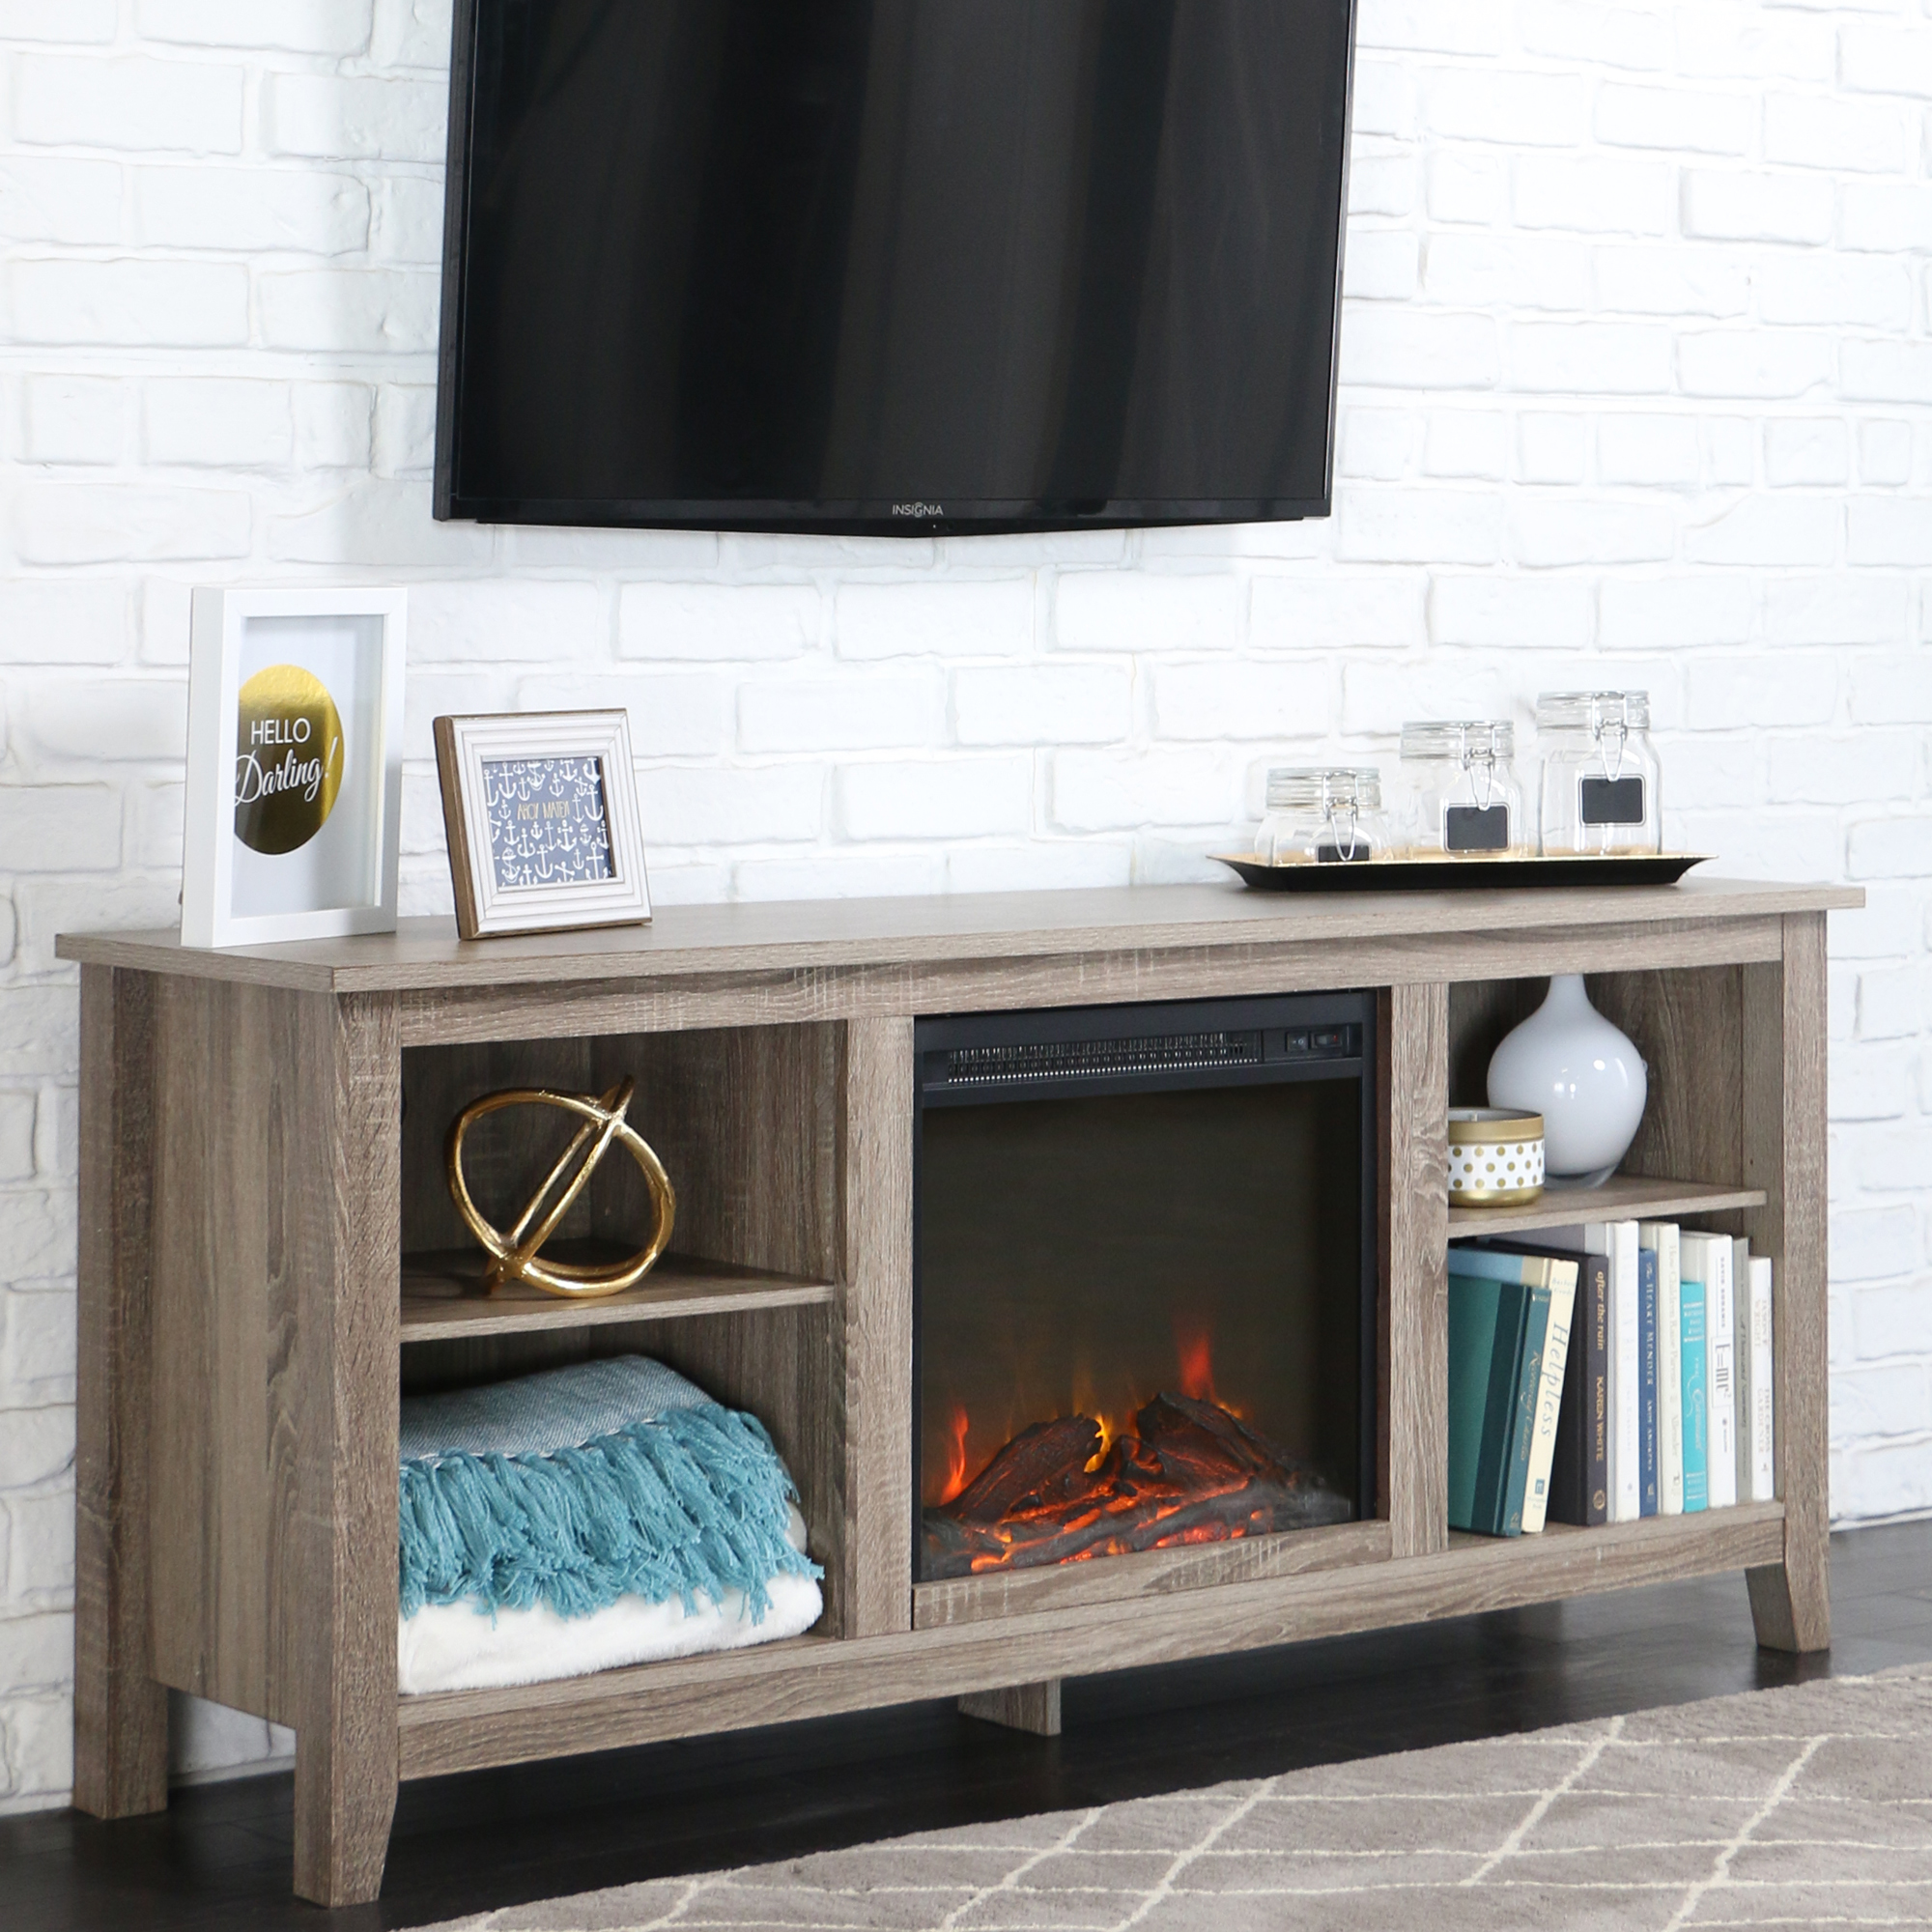 Walker Edison Traditional Fireplace TV Stand for TVs Up to 64", Driftwood - image 6 of 9